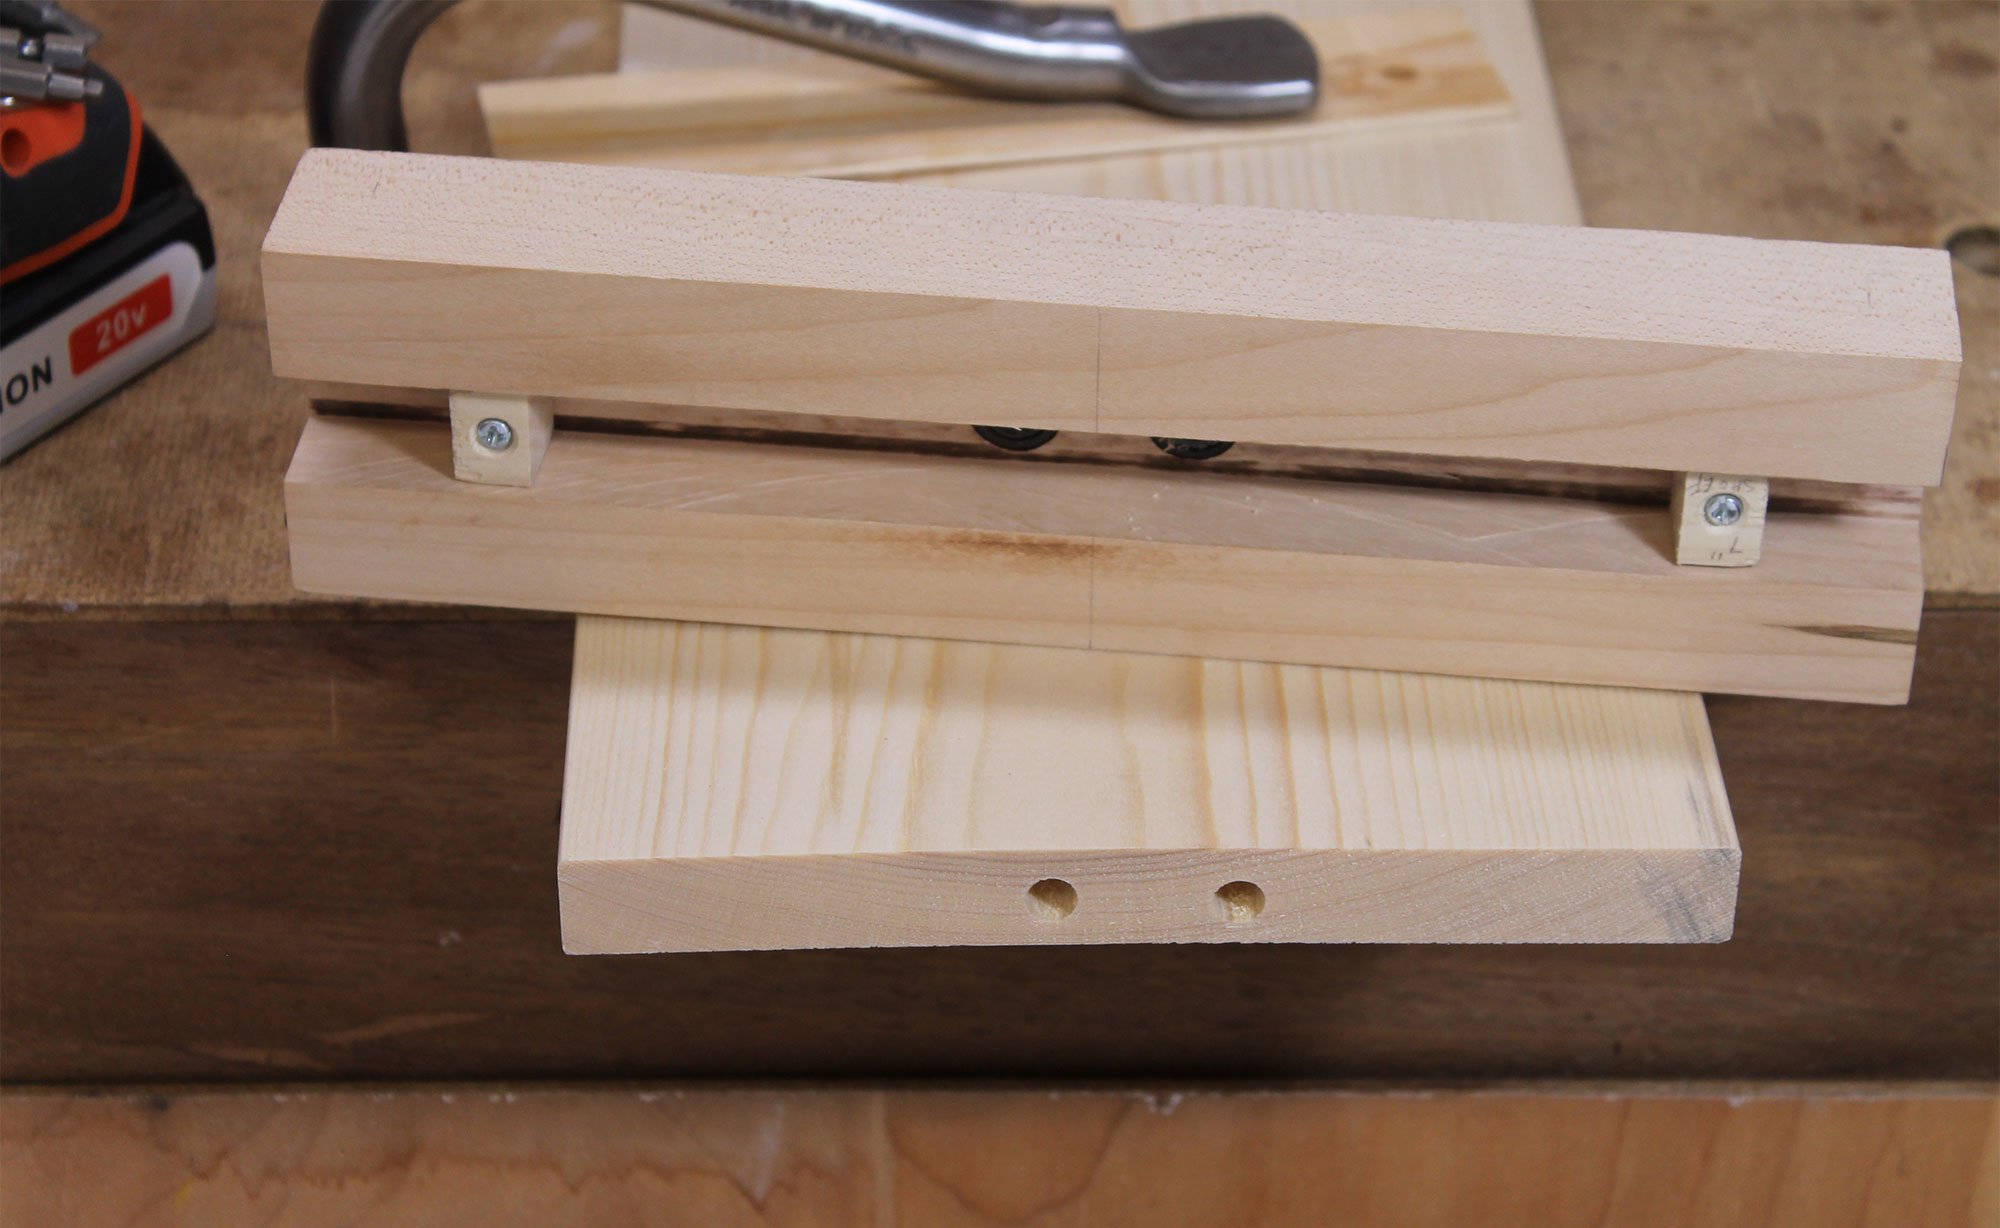 Reposition the end blocks in the dado to handle stock of different widths.